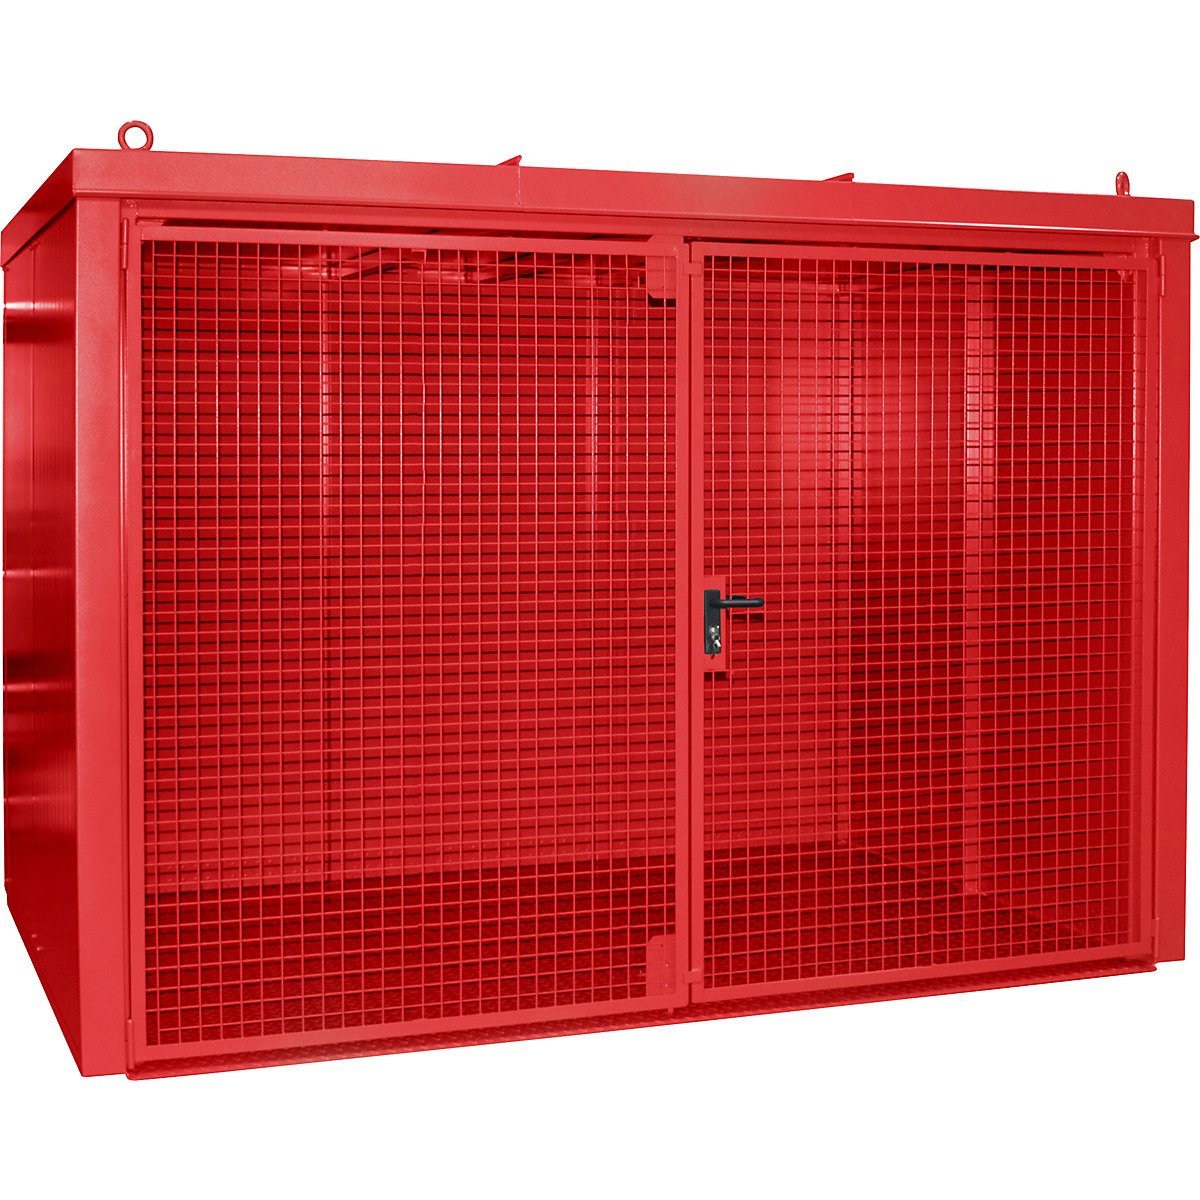 Gas cylinder container, fire resistant – eurokraft pro, for 96 cylinders with Ø 230 mm, red-3